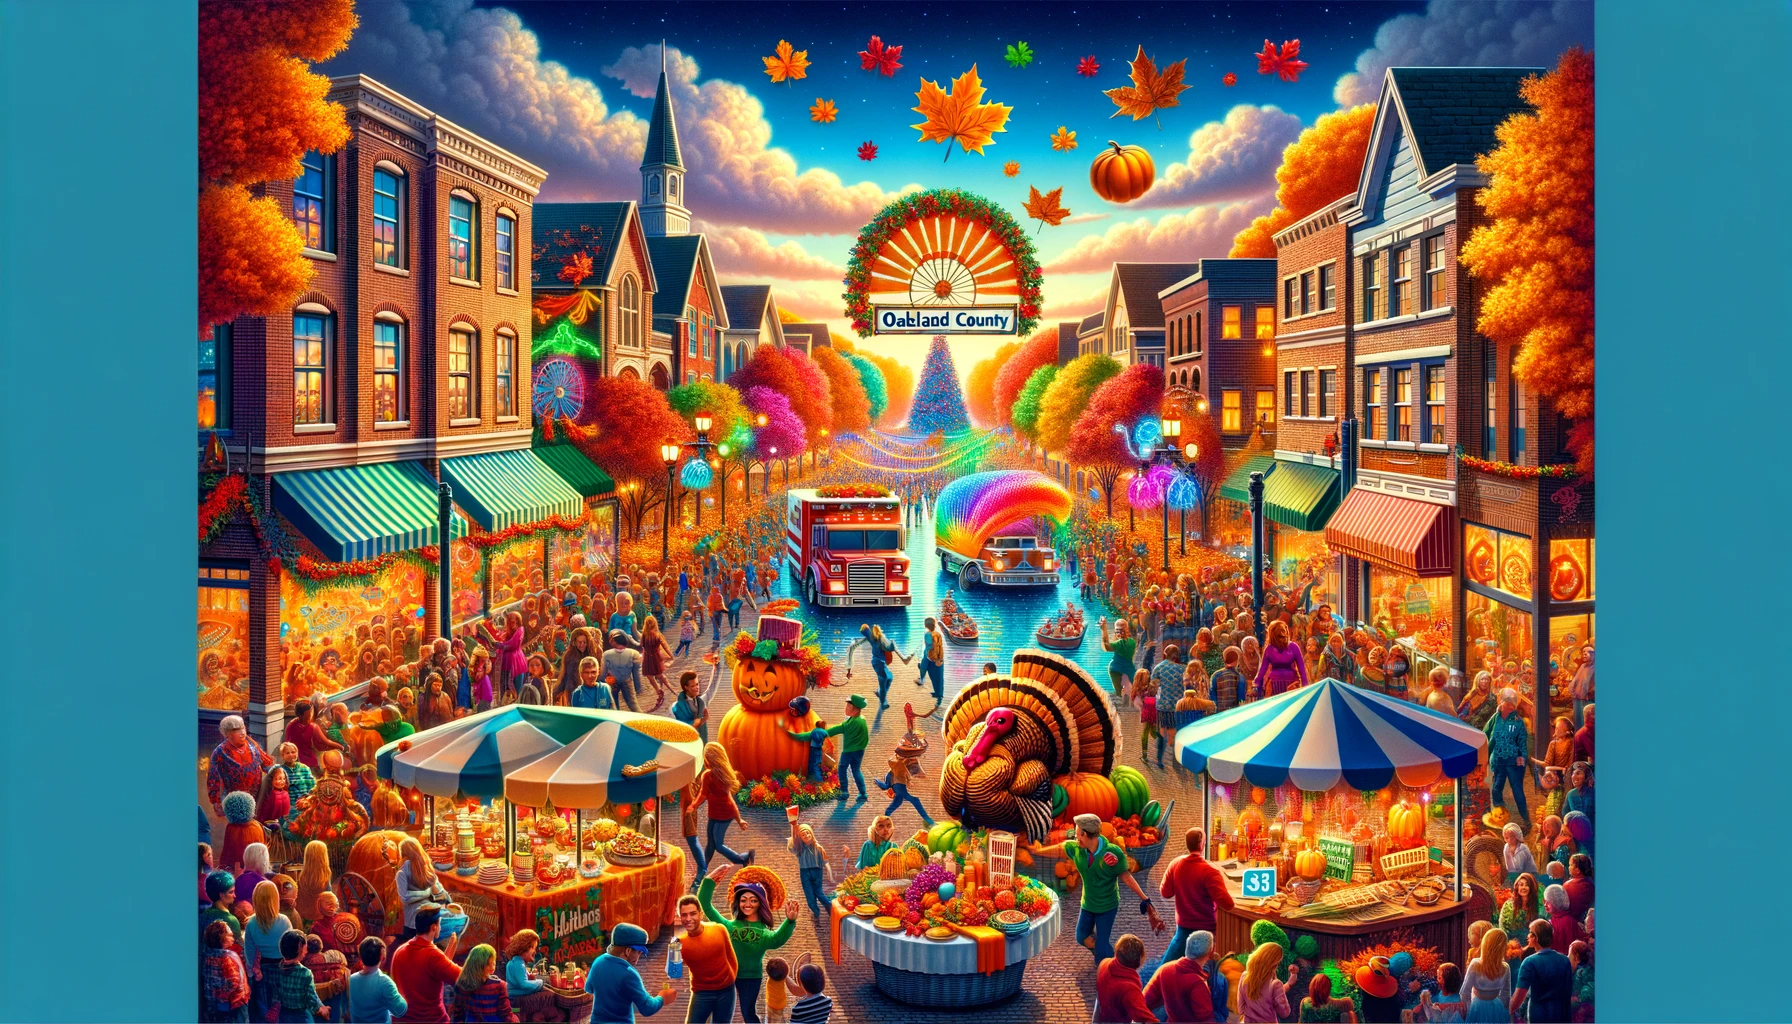 A_vibrant_and_festive_scene_depicting_Thanksgiving_events_in_Oakland_County__Michigan._The_image_should_show_a_bustling_street_scene_with_people_enjoy.png